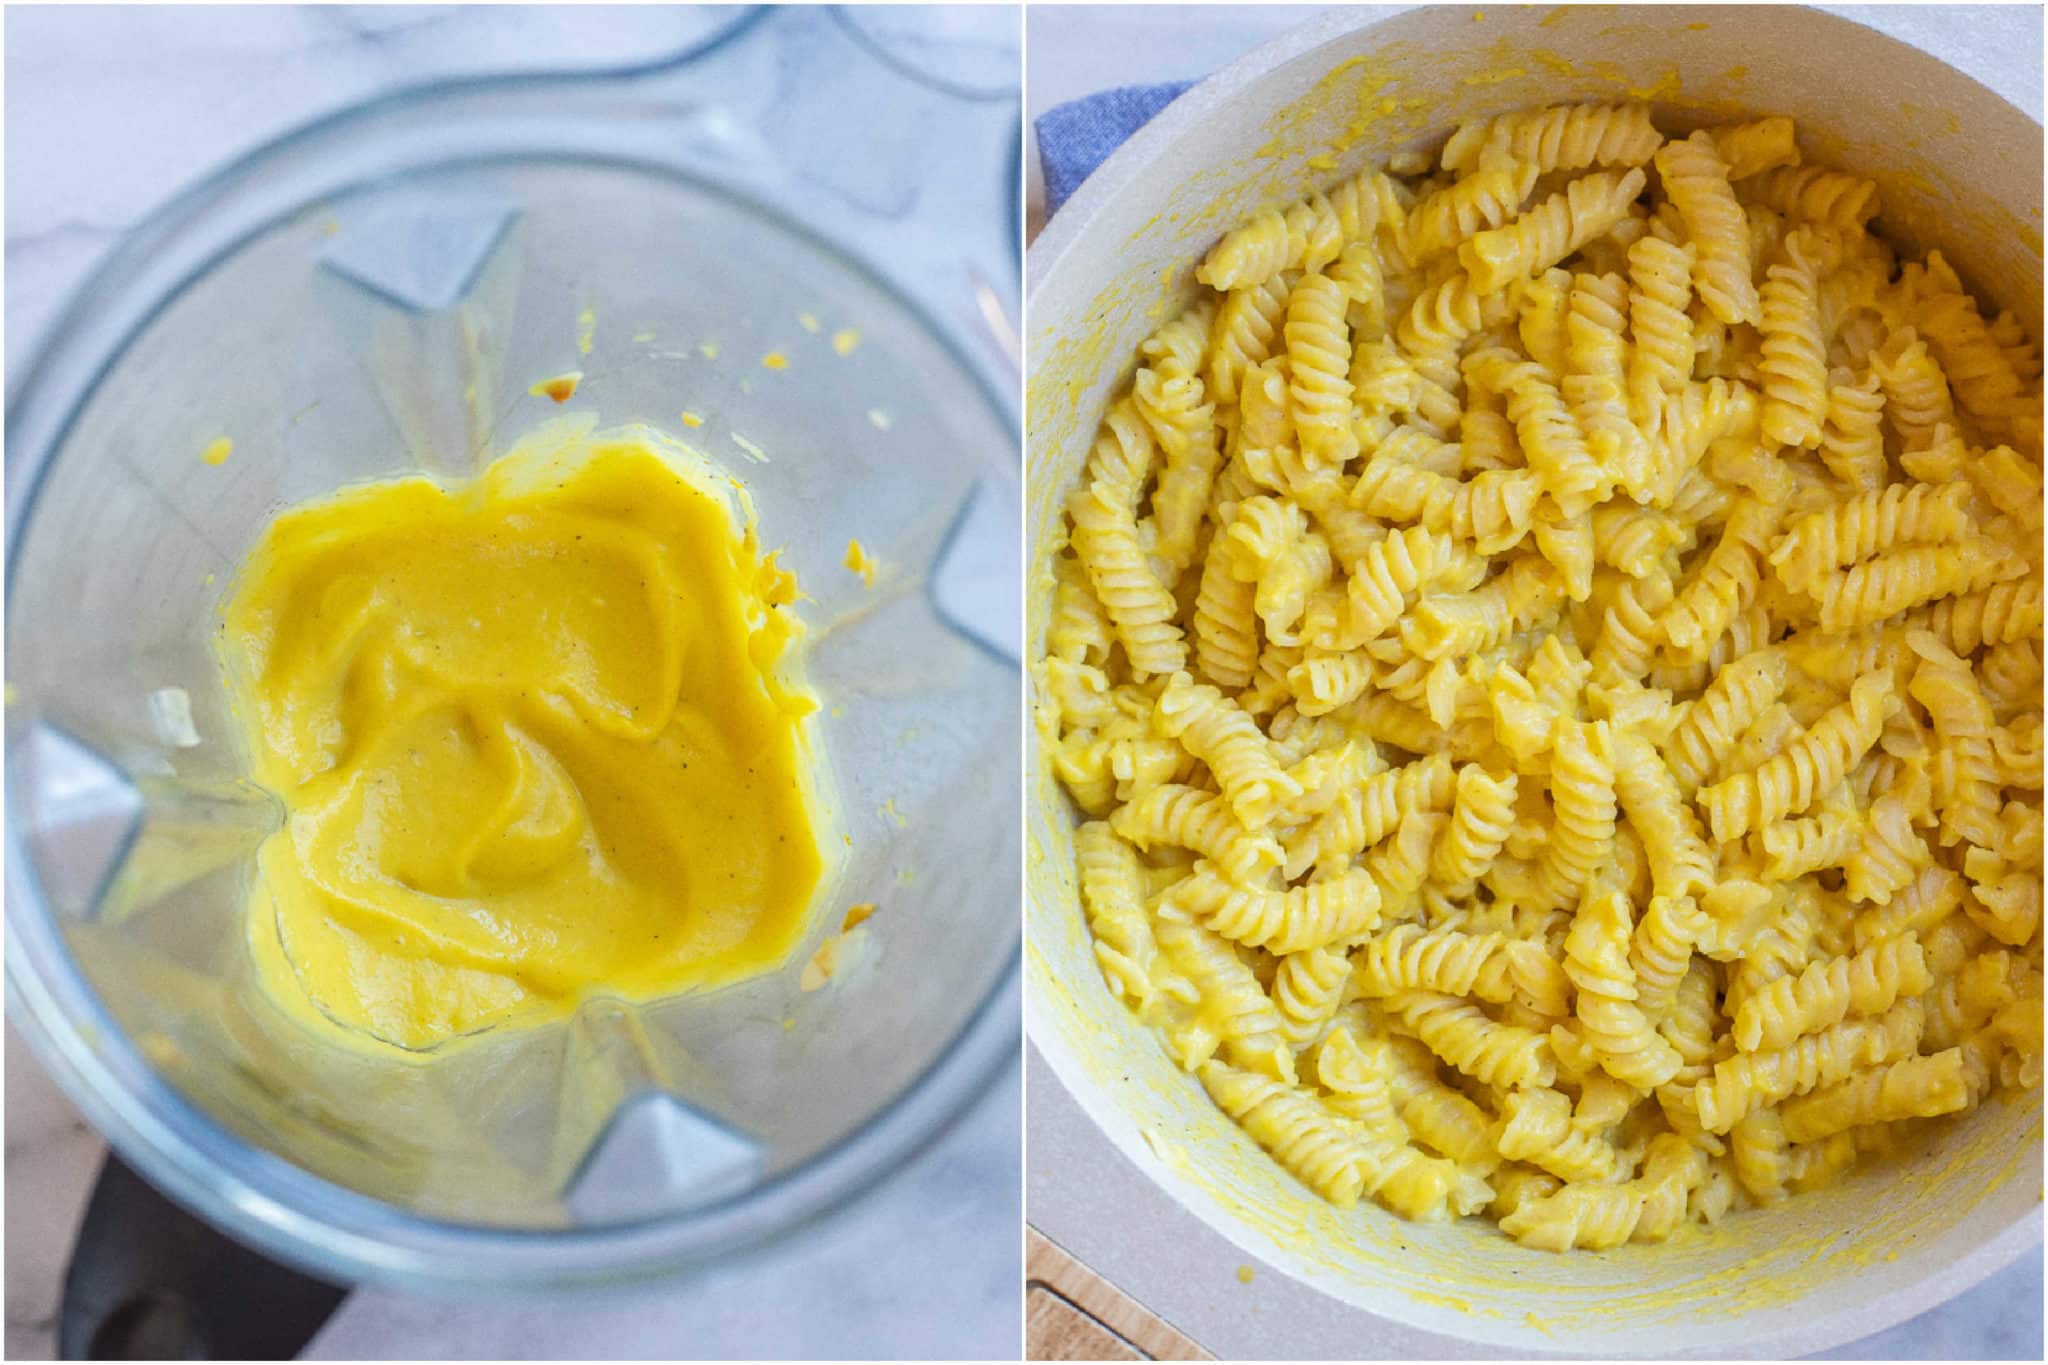 showing how to make the golden squash puree and then mix it into the pasta